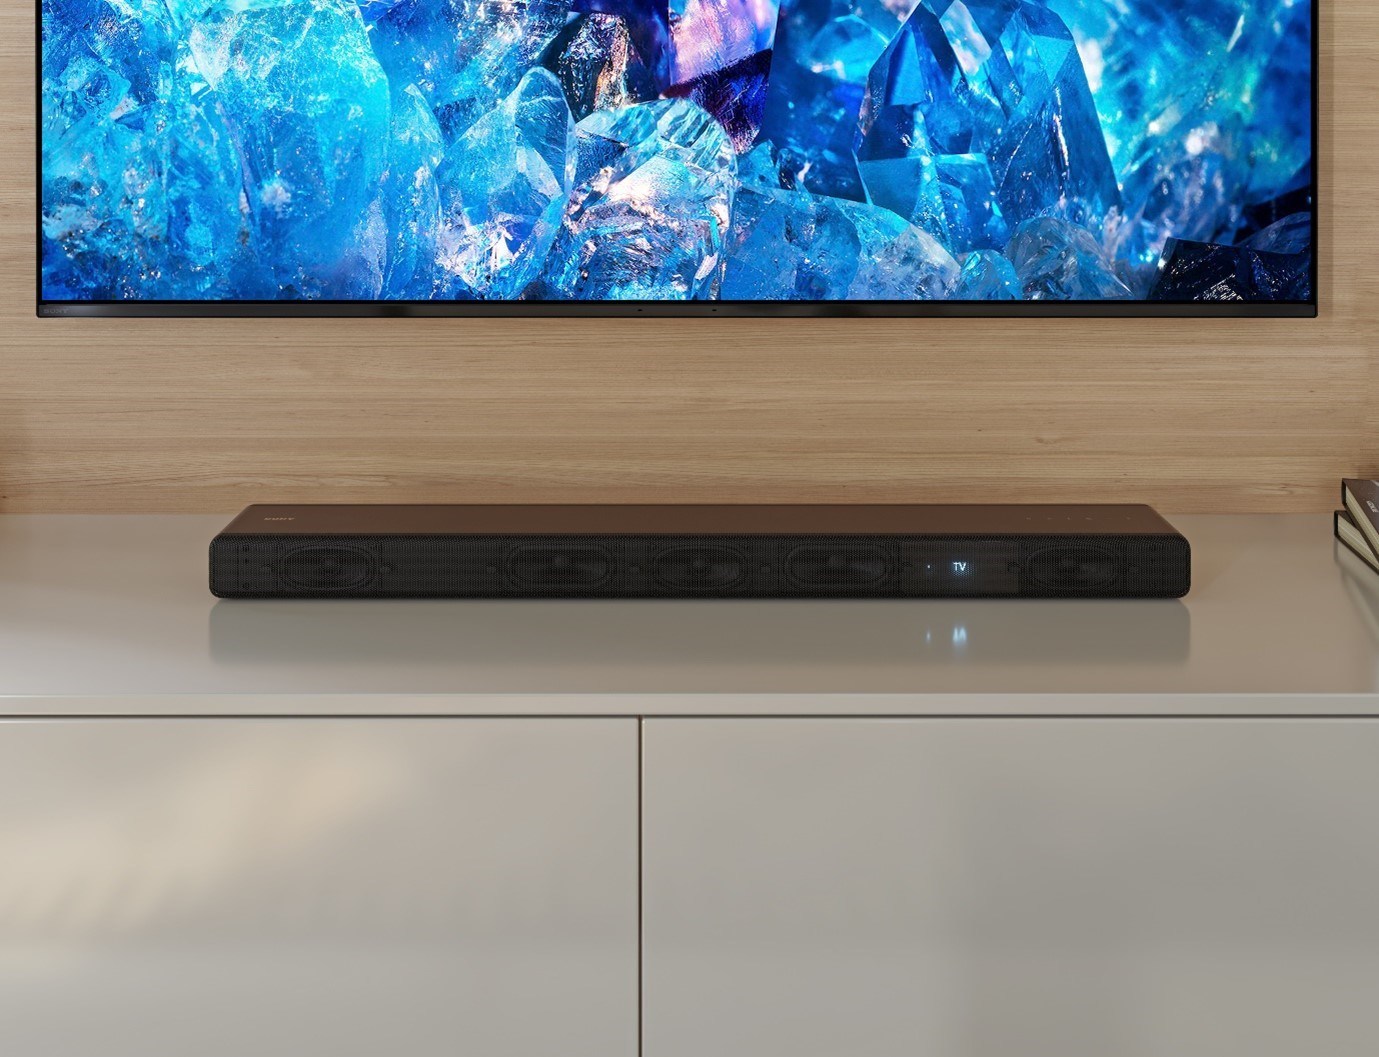 Sony Electronics Introduces HT-A3000 3.1ch Dolby Atmos® Soundbar that Combines Perfectly with Optional Rear Speakers to Deliver an Immersive 360 Spatial Sound Experience